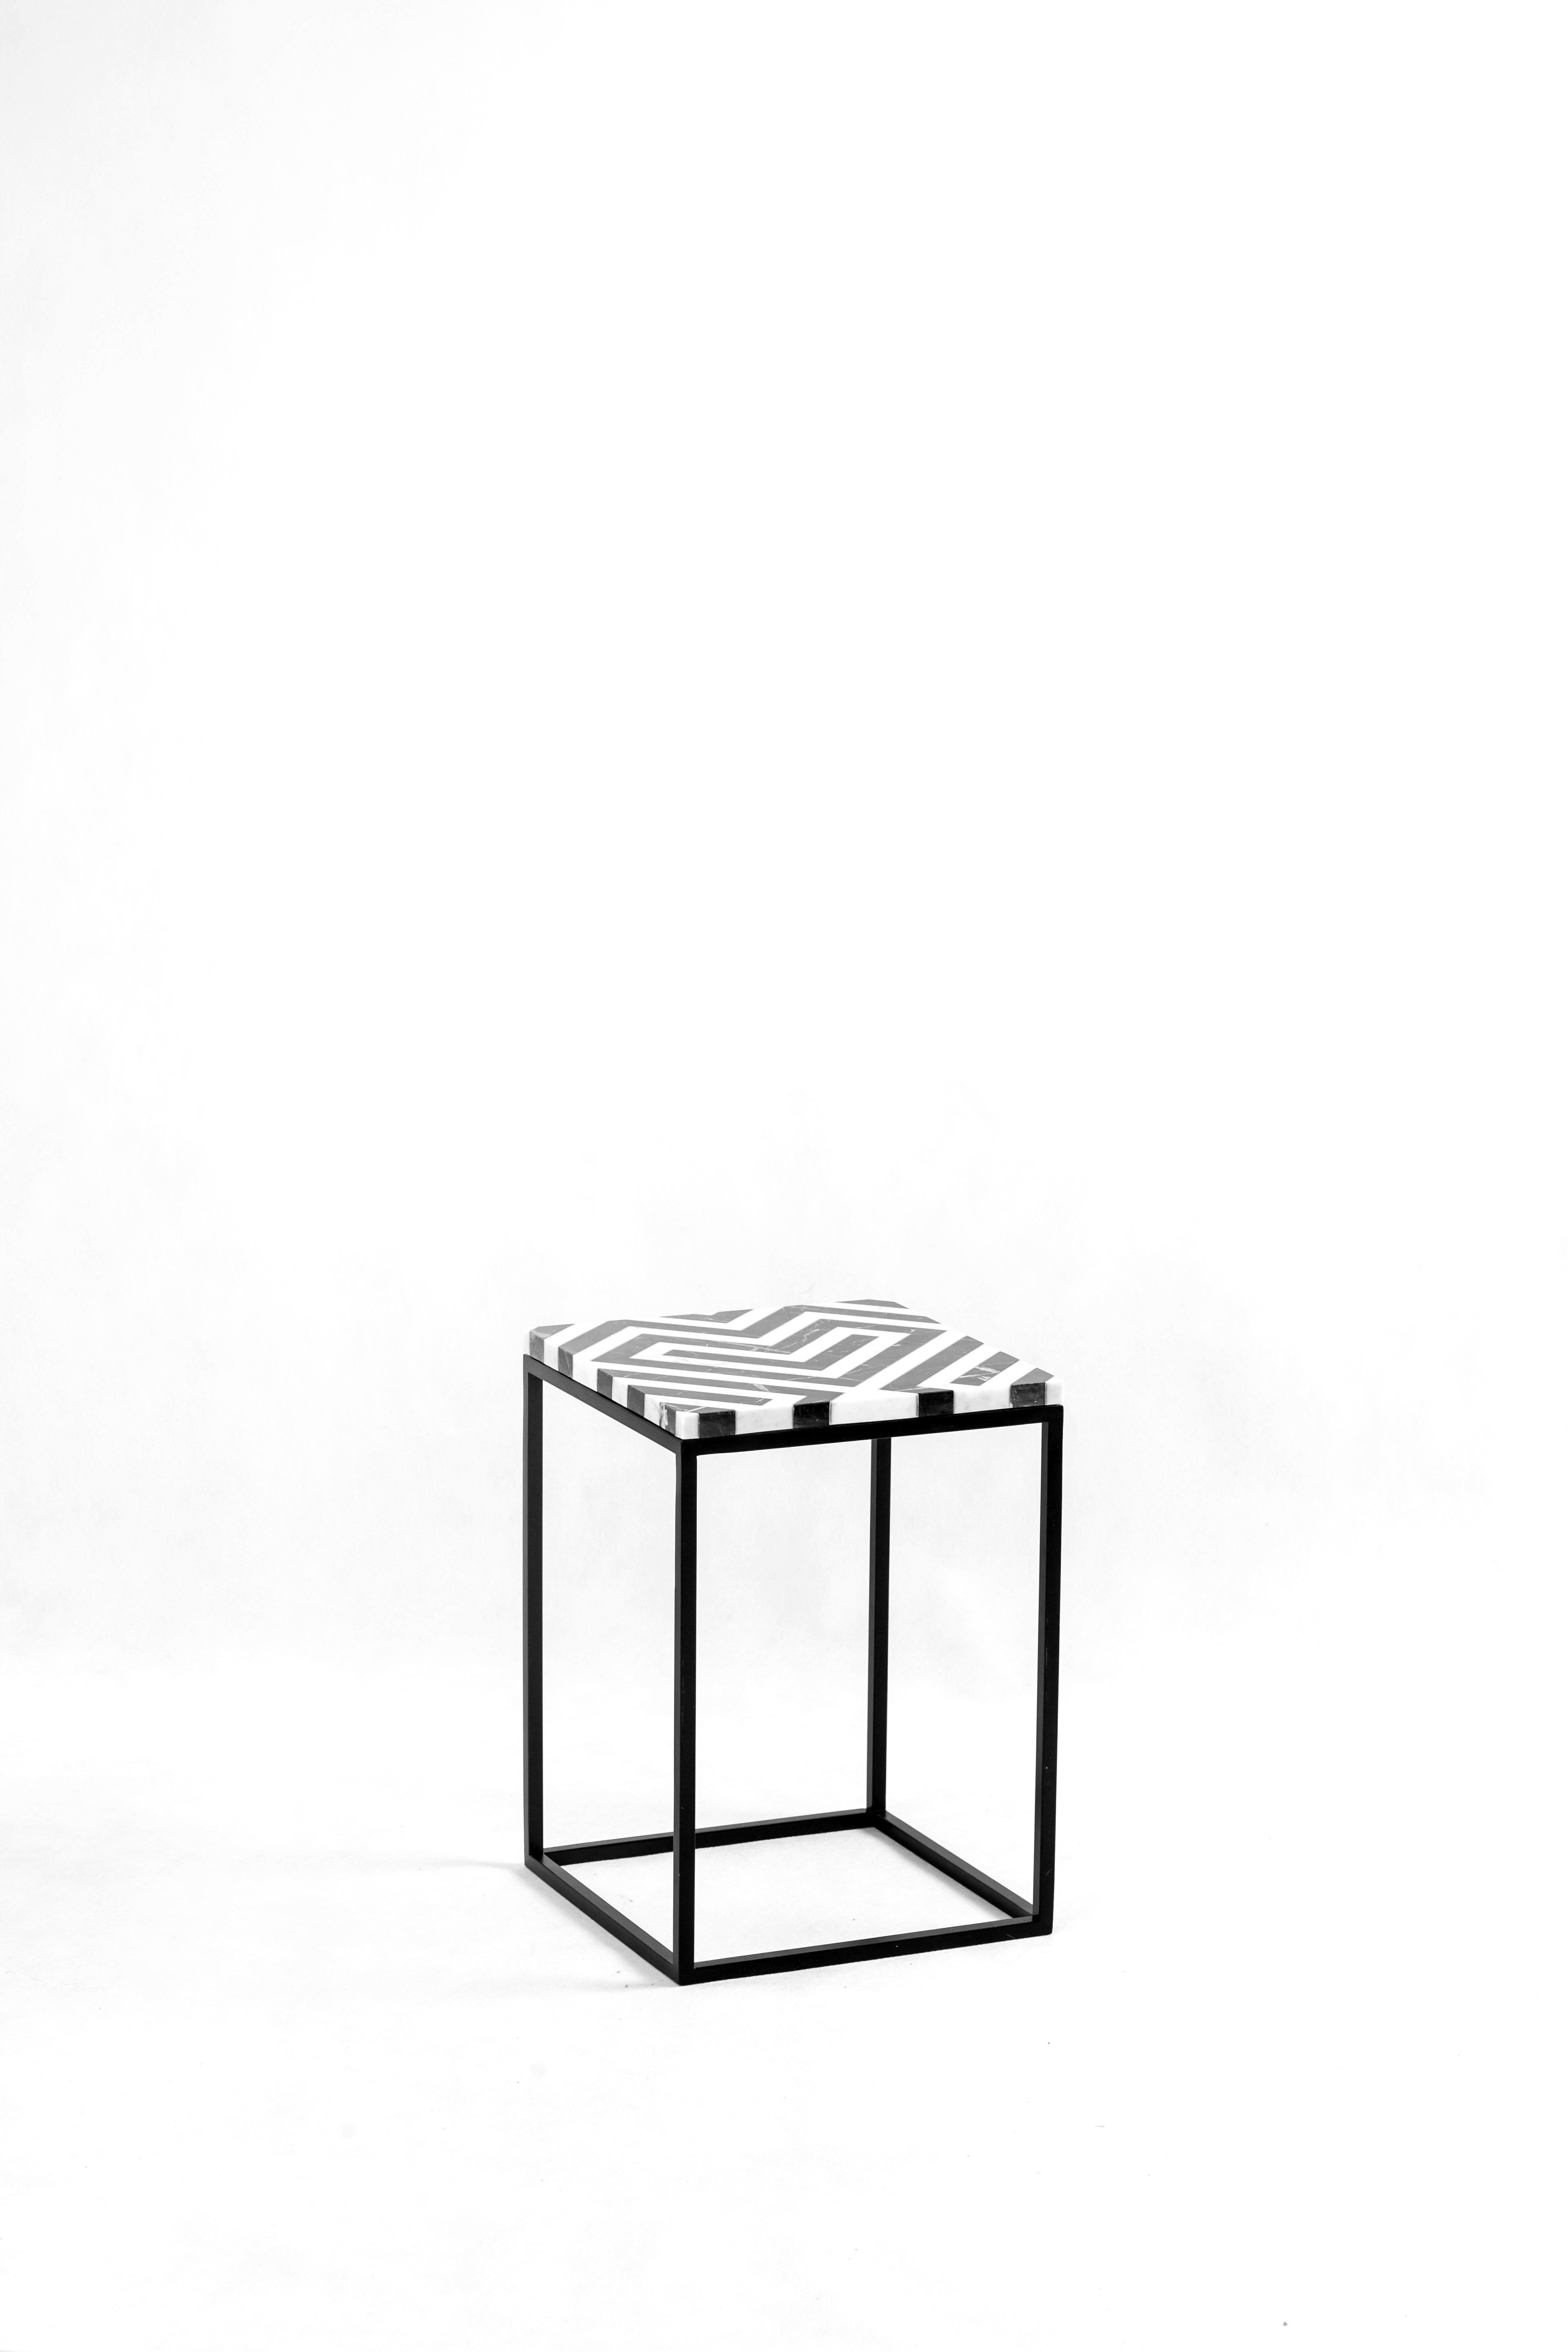 Small Heart Side Table by Un’common
Dimensions: W 30 x D 30 x H 42 cm
Materials: Marble

HEART is a handy table that can serve various functions in your home. It is an amazing piece of geometric madness! This distinct combination of the white